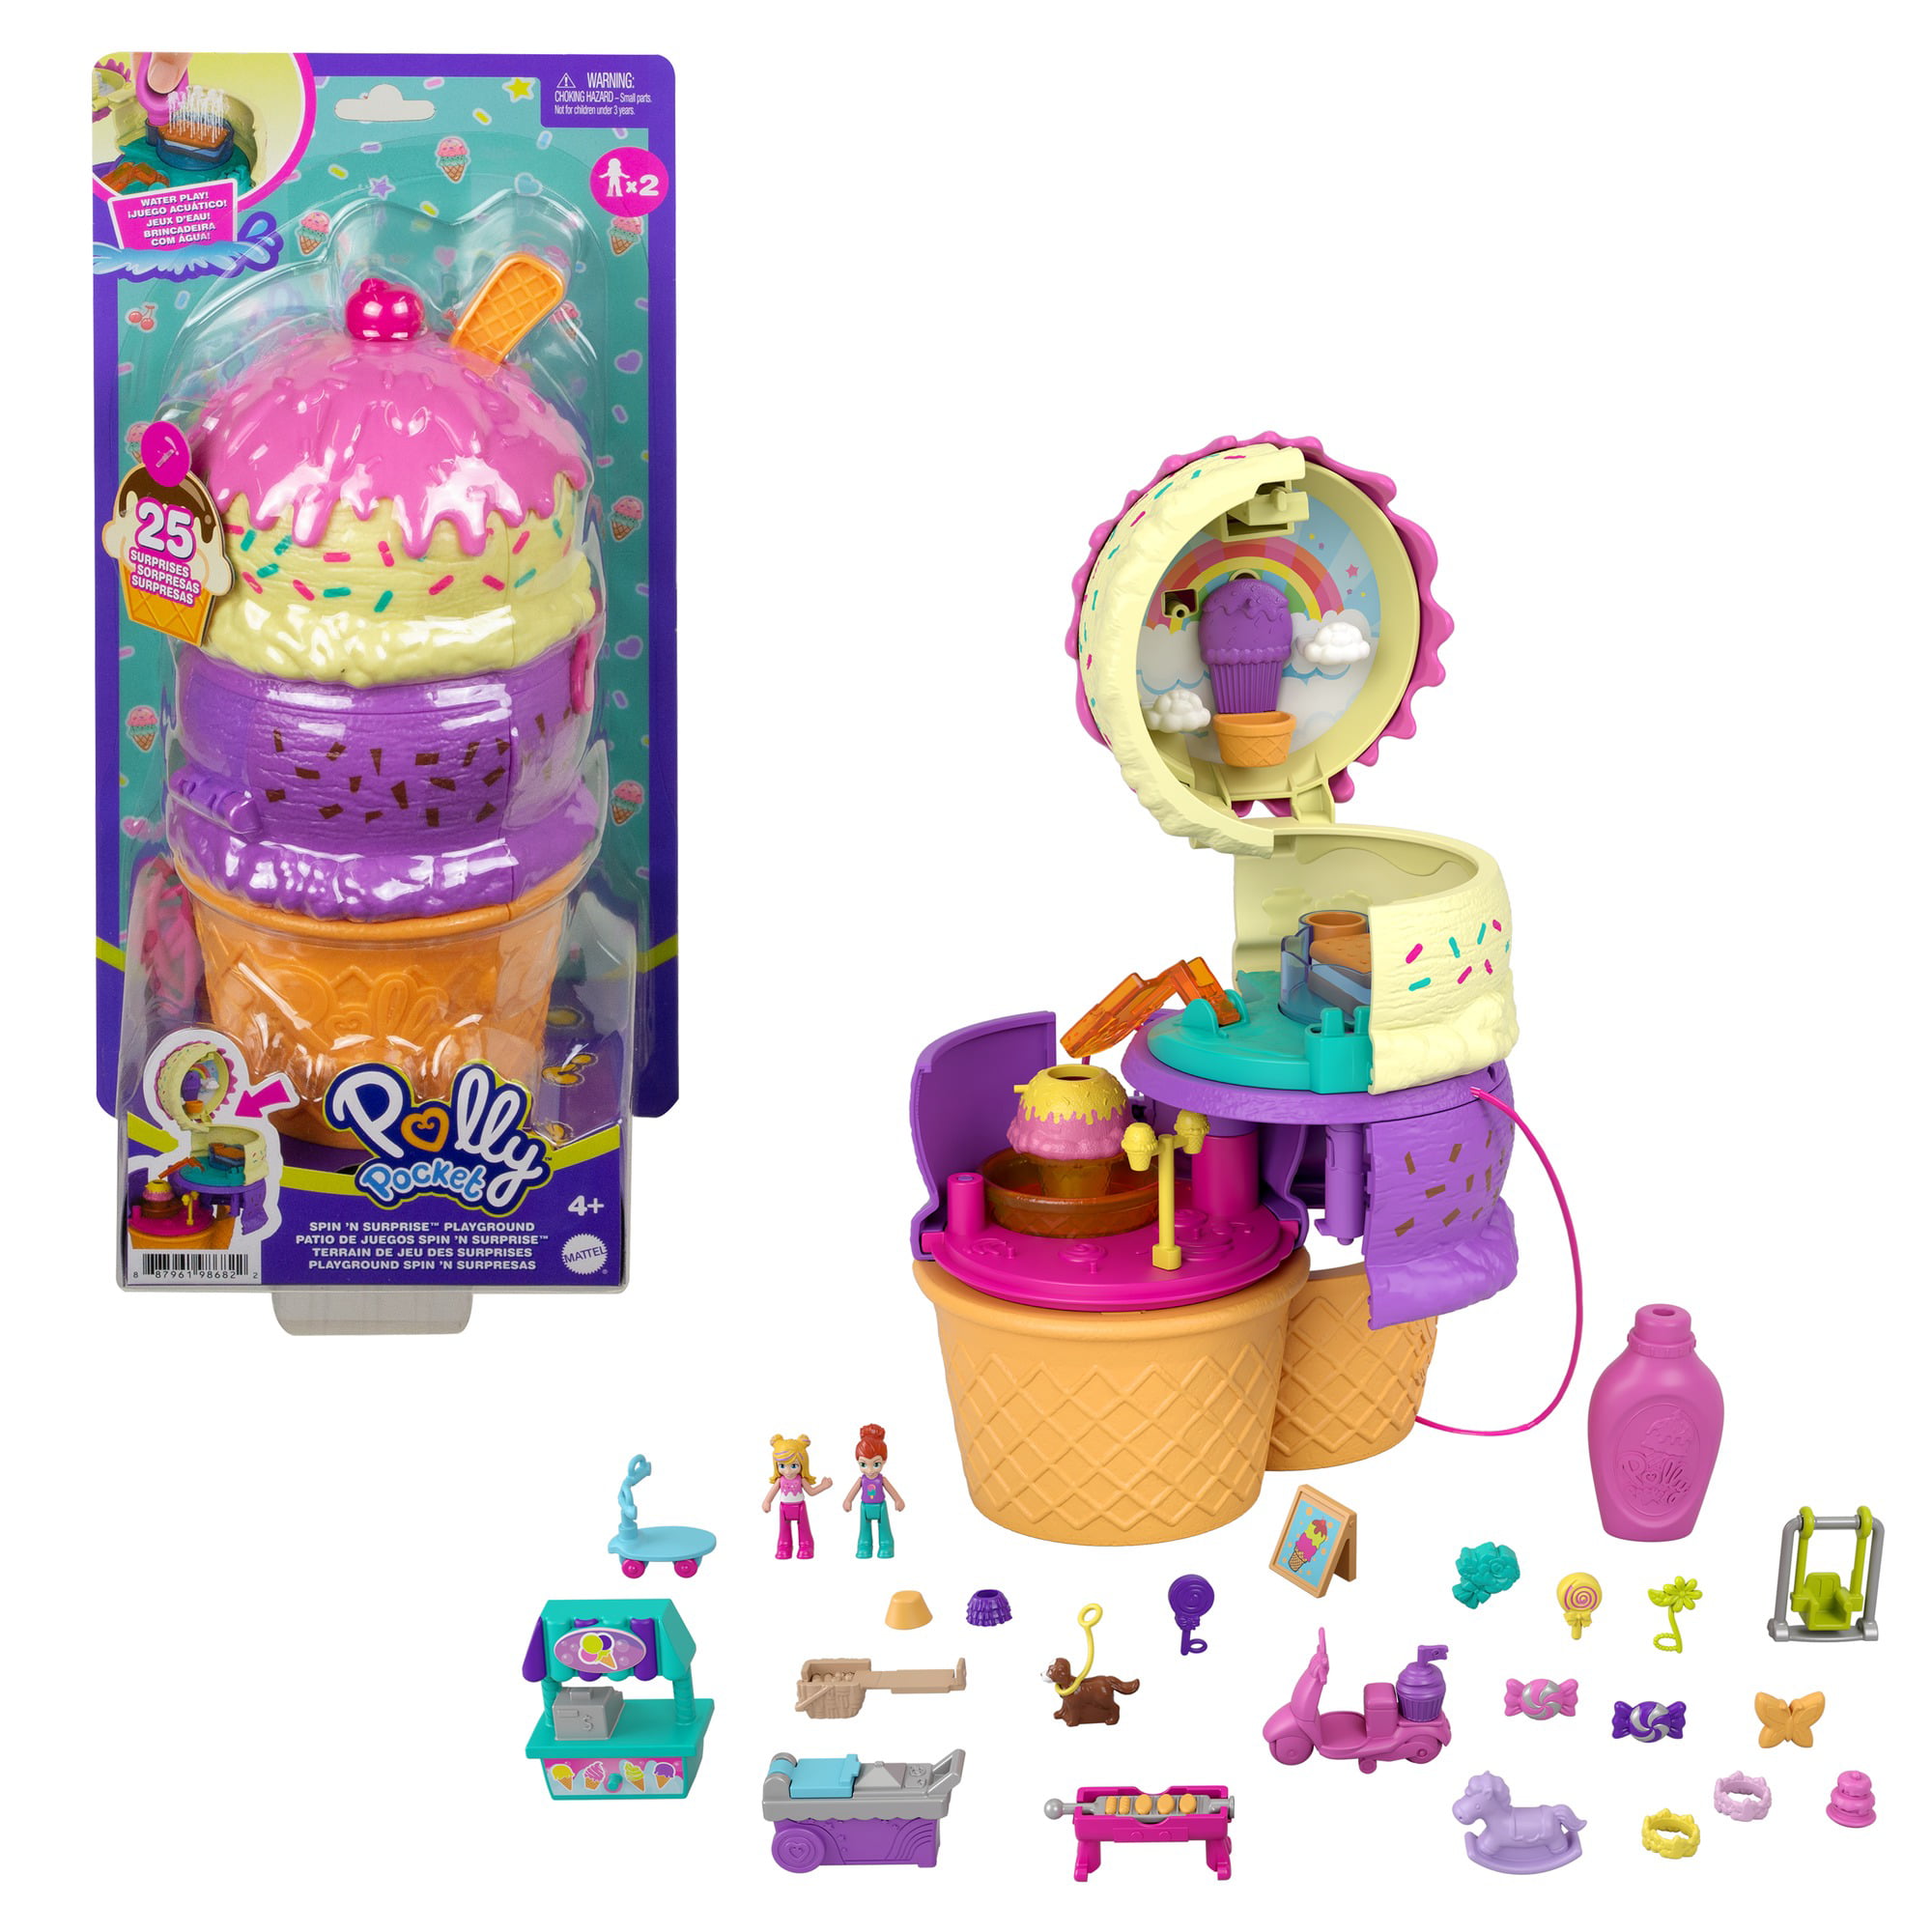 NEW Polly Pocket Pollyville Ice Cream Truck Play Areas with Doll & Accessories 